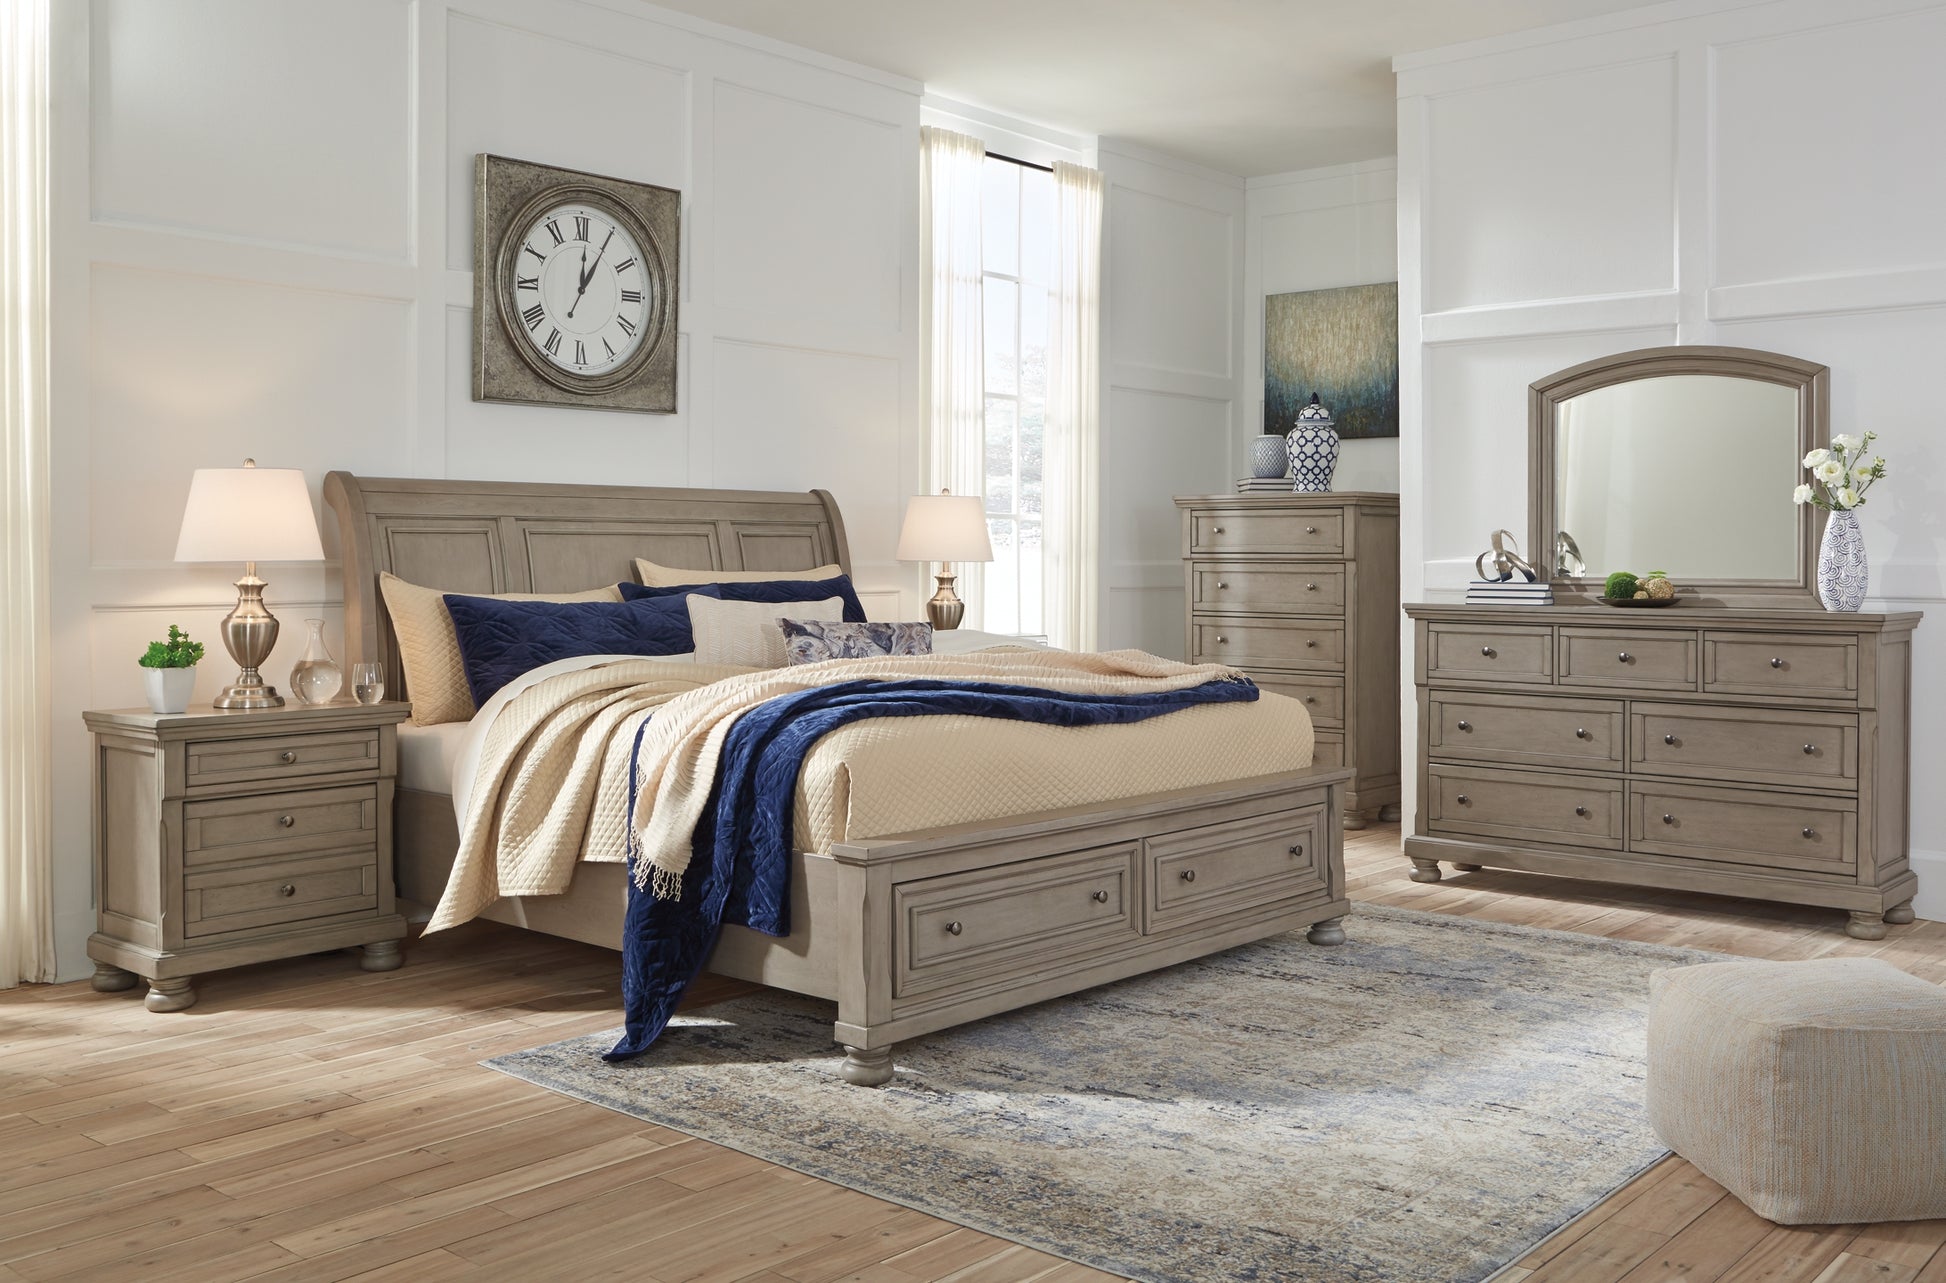 Lettner California King Sleigh Bed with Mirrored Dresser and 2 Nightstands JB's Furniture  Home Furniture, Home Decor, Furniture Store